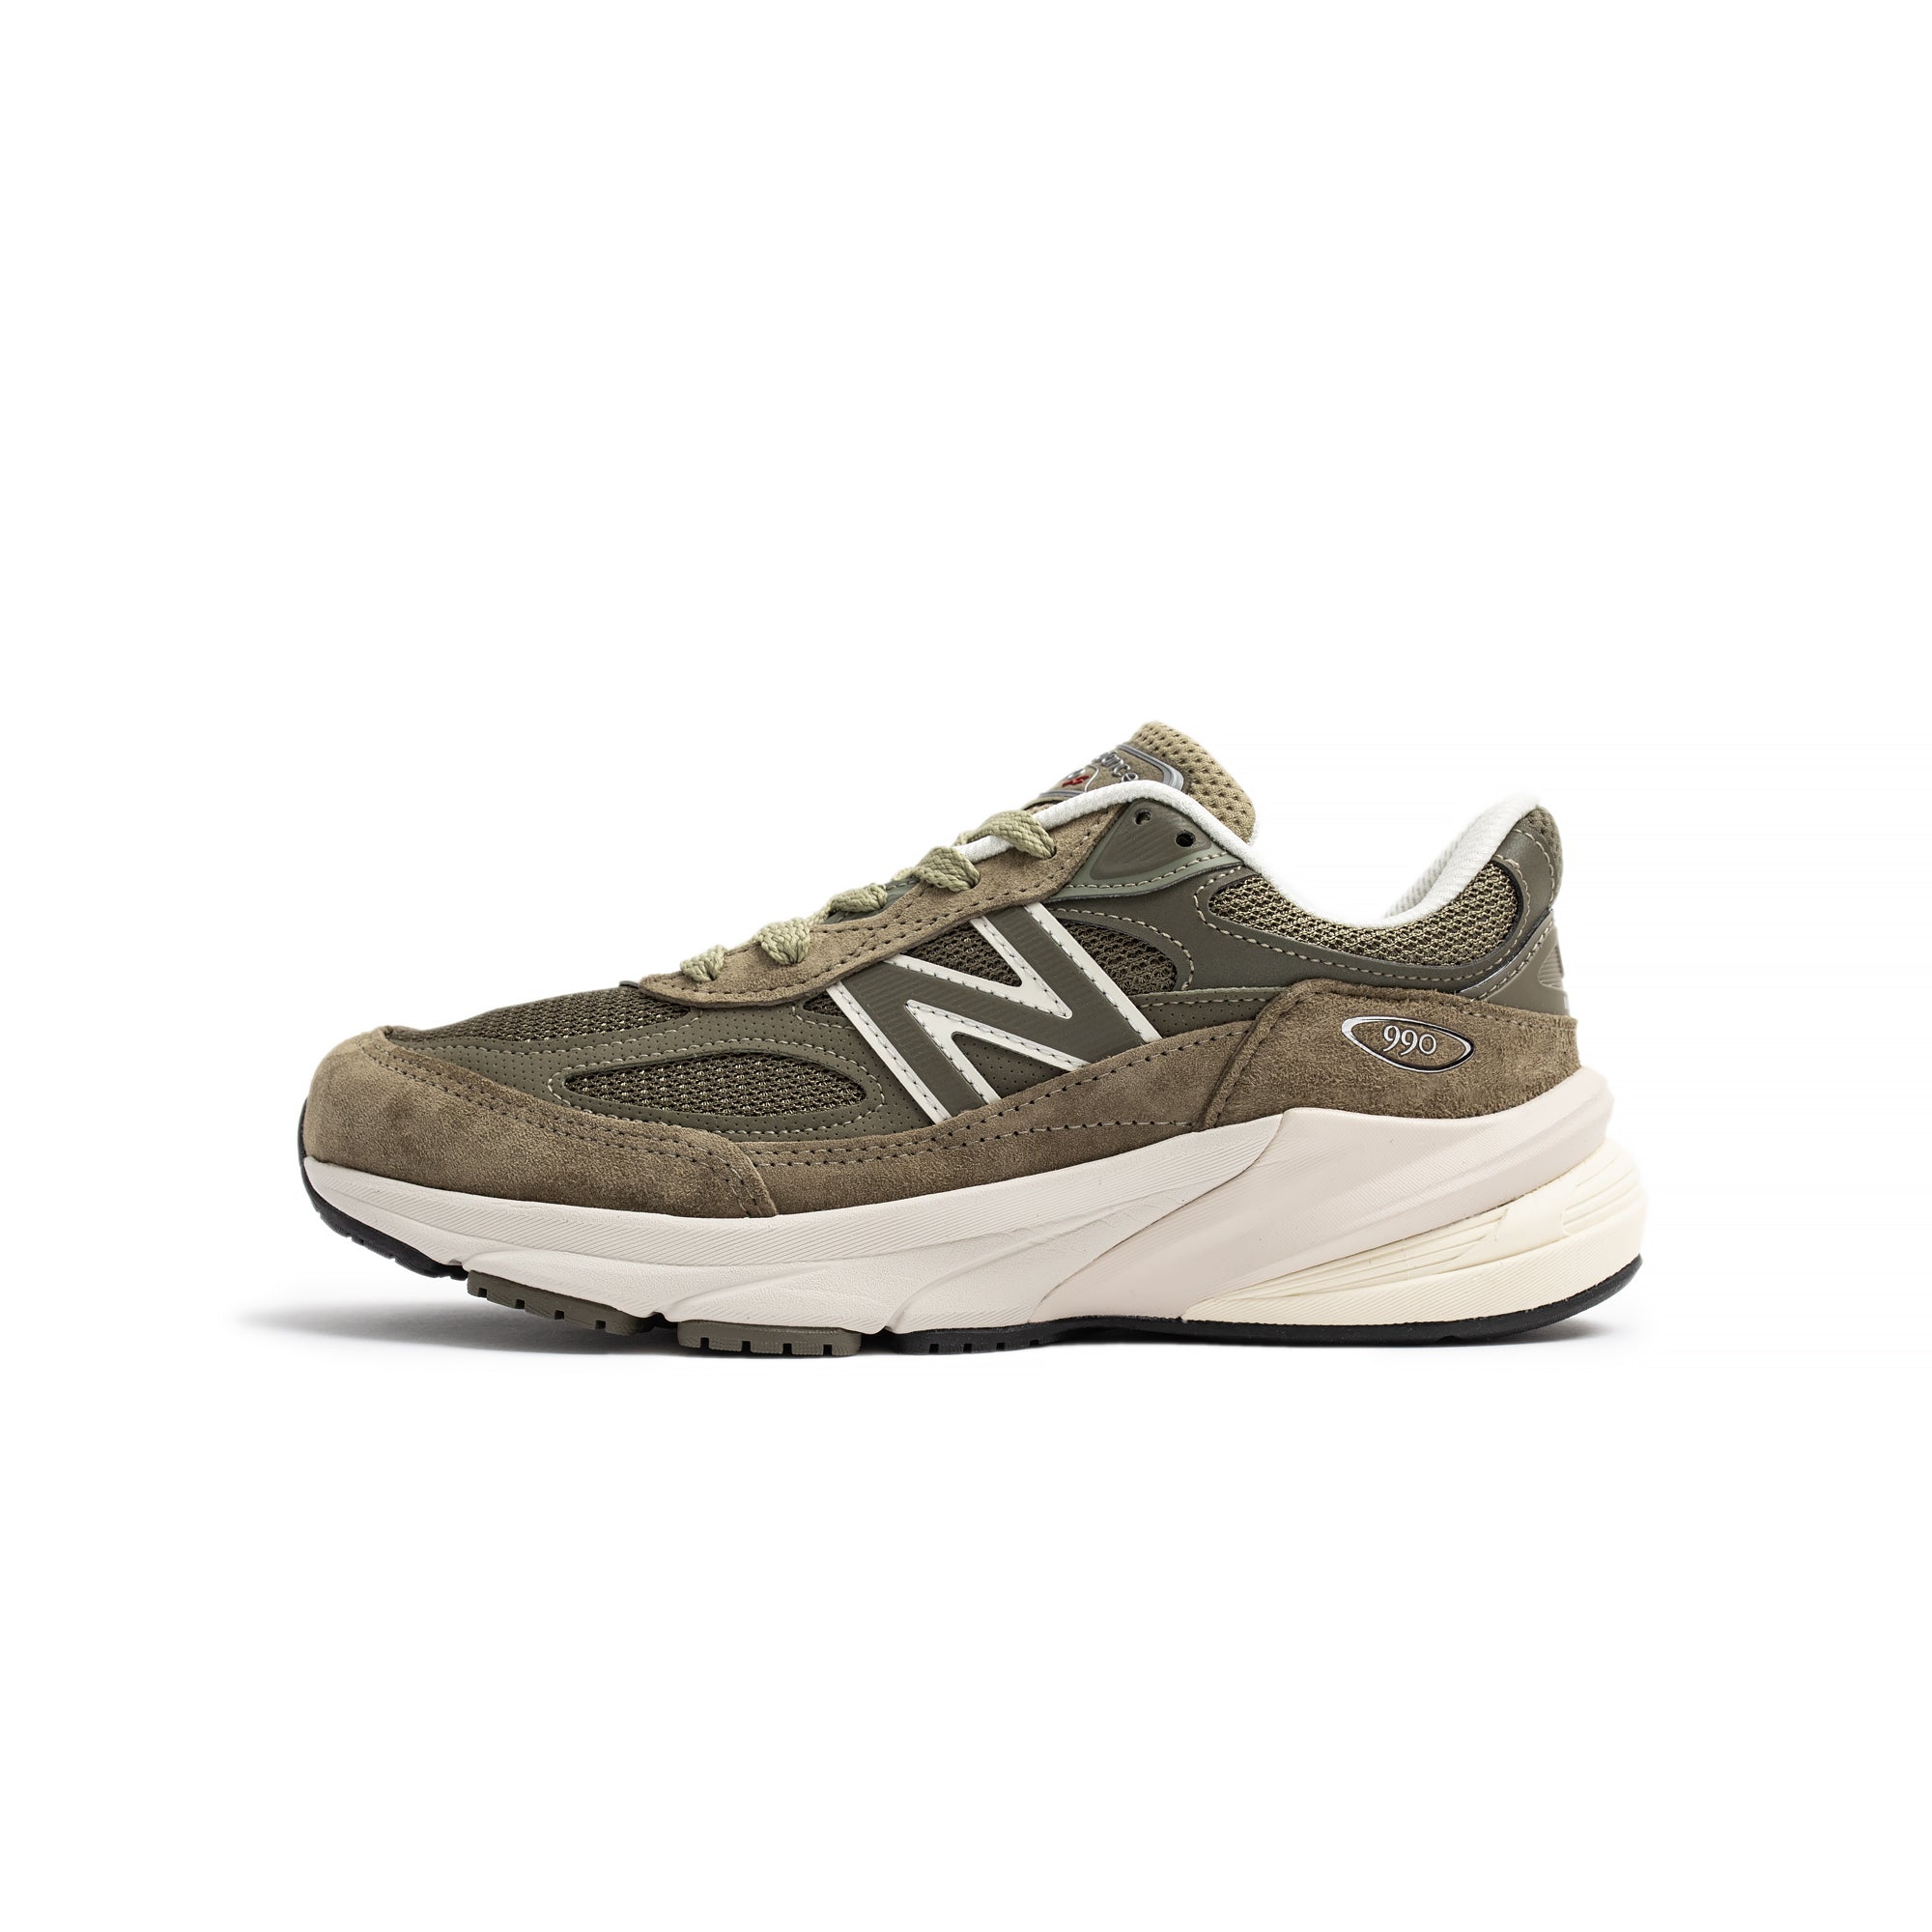 New Balance Mens Made in USA 990v6 Shoes card image